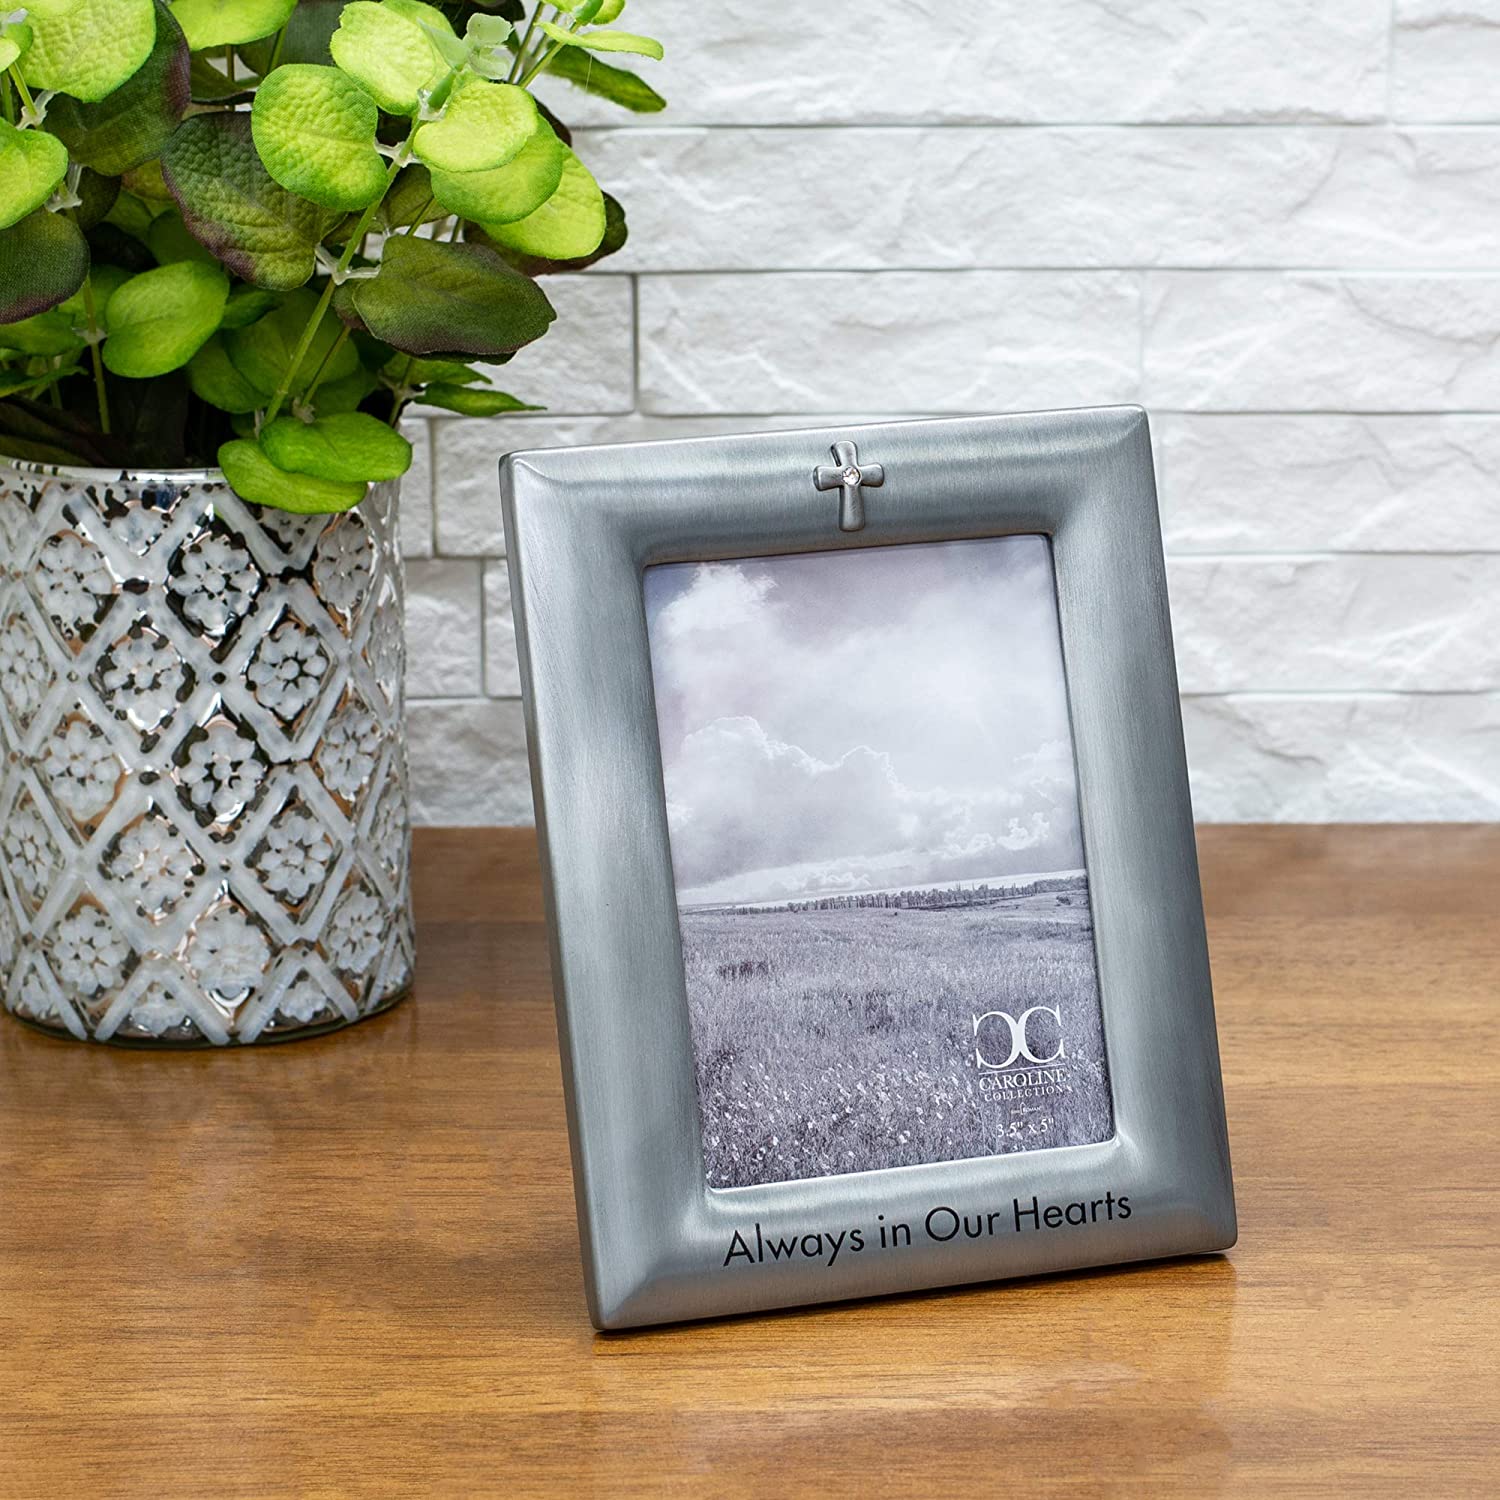 Always In Our Hearts Cross Silver Tone 9 inch Zinc Alloy Metal Tabletop Frame